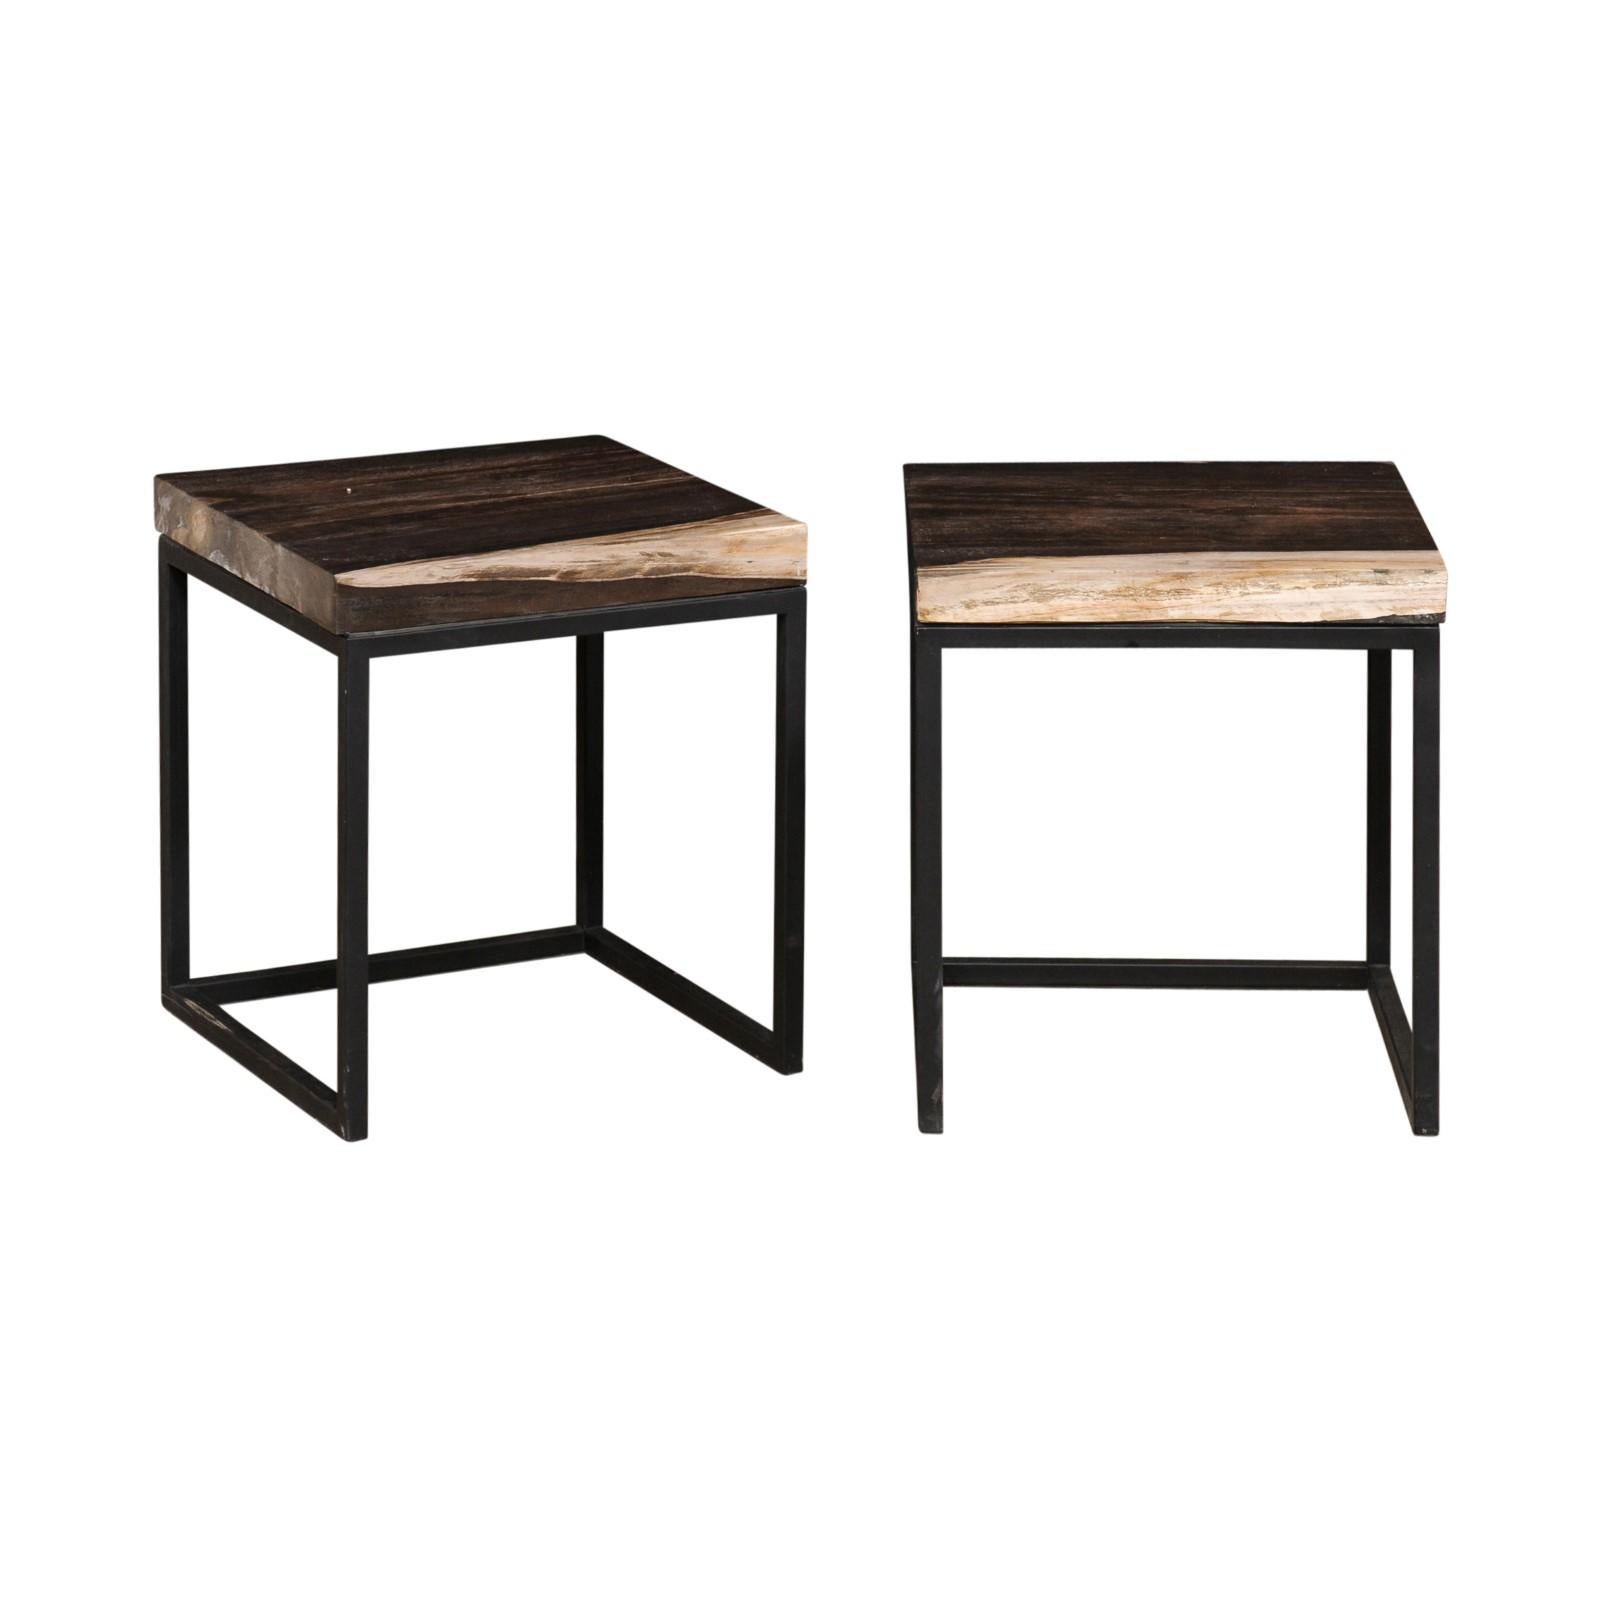 A pair of modern style custom created petrified wood top and iron side tables. This pair of tables each feature a 15.75